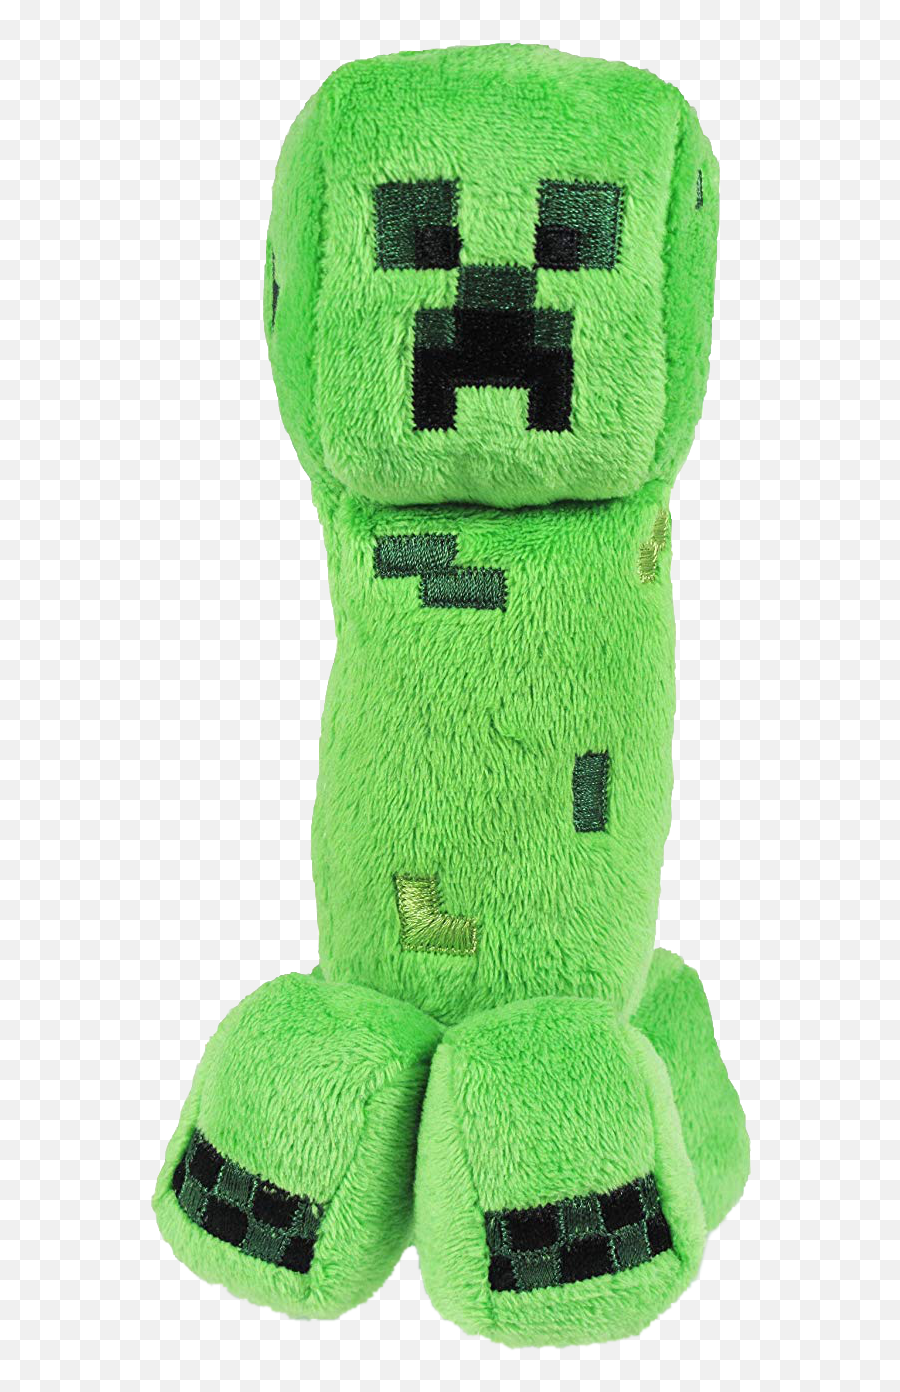 Creeper Png Background Image - Minecraft Creeper Plush Emoji,Minecraft Creeper Png